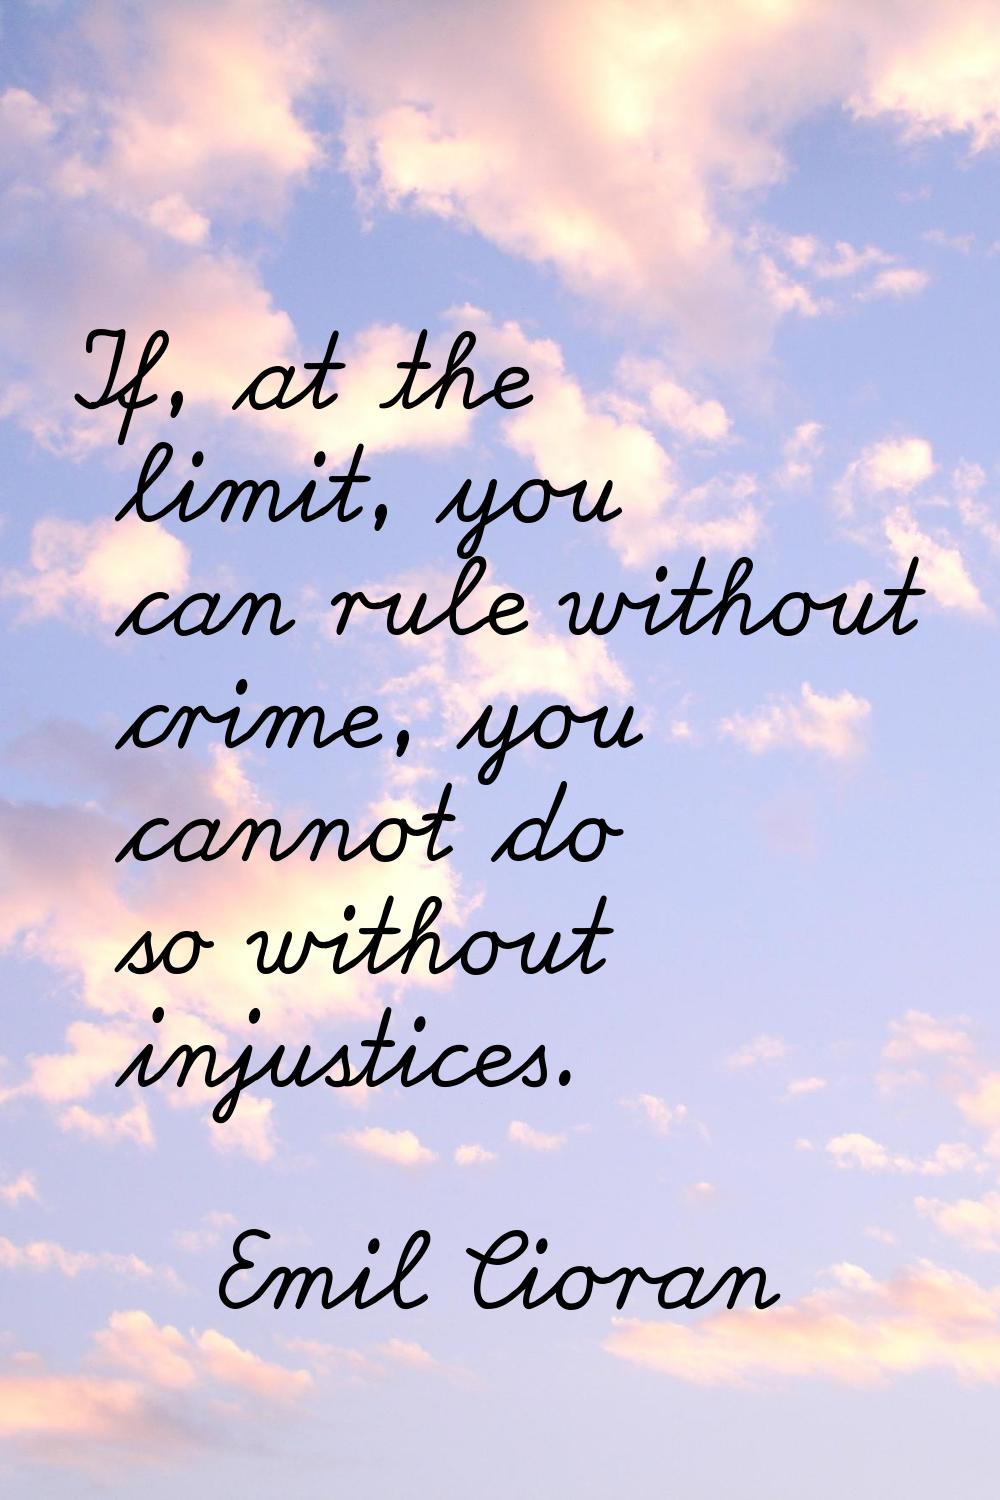 If, at the limit, you can rule without crime, you cannot do so without injustices.